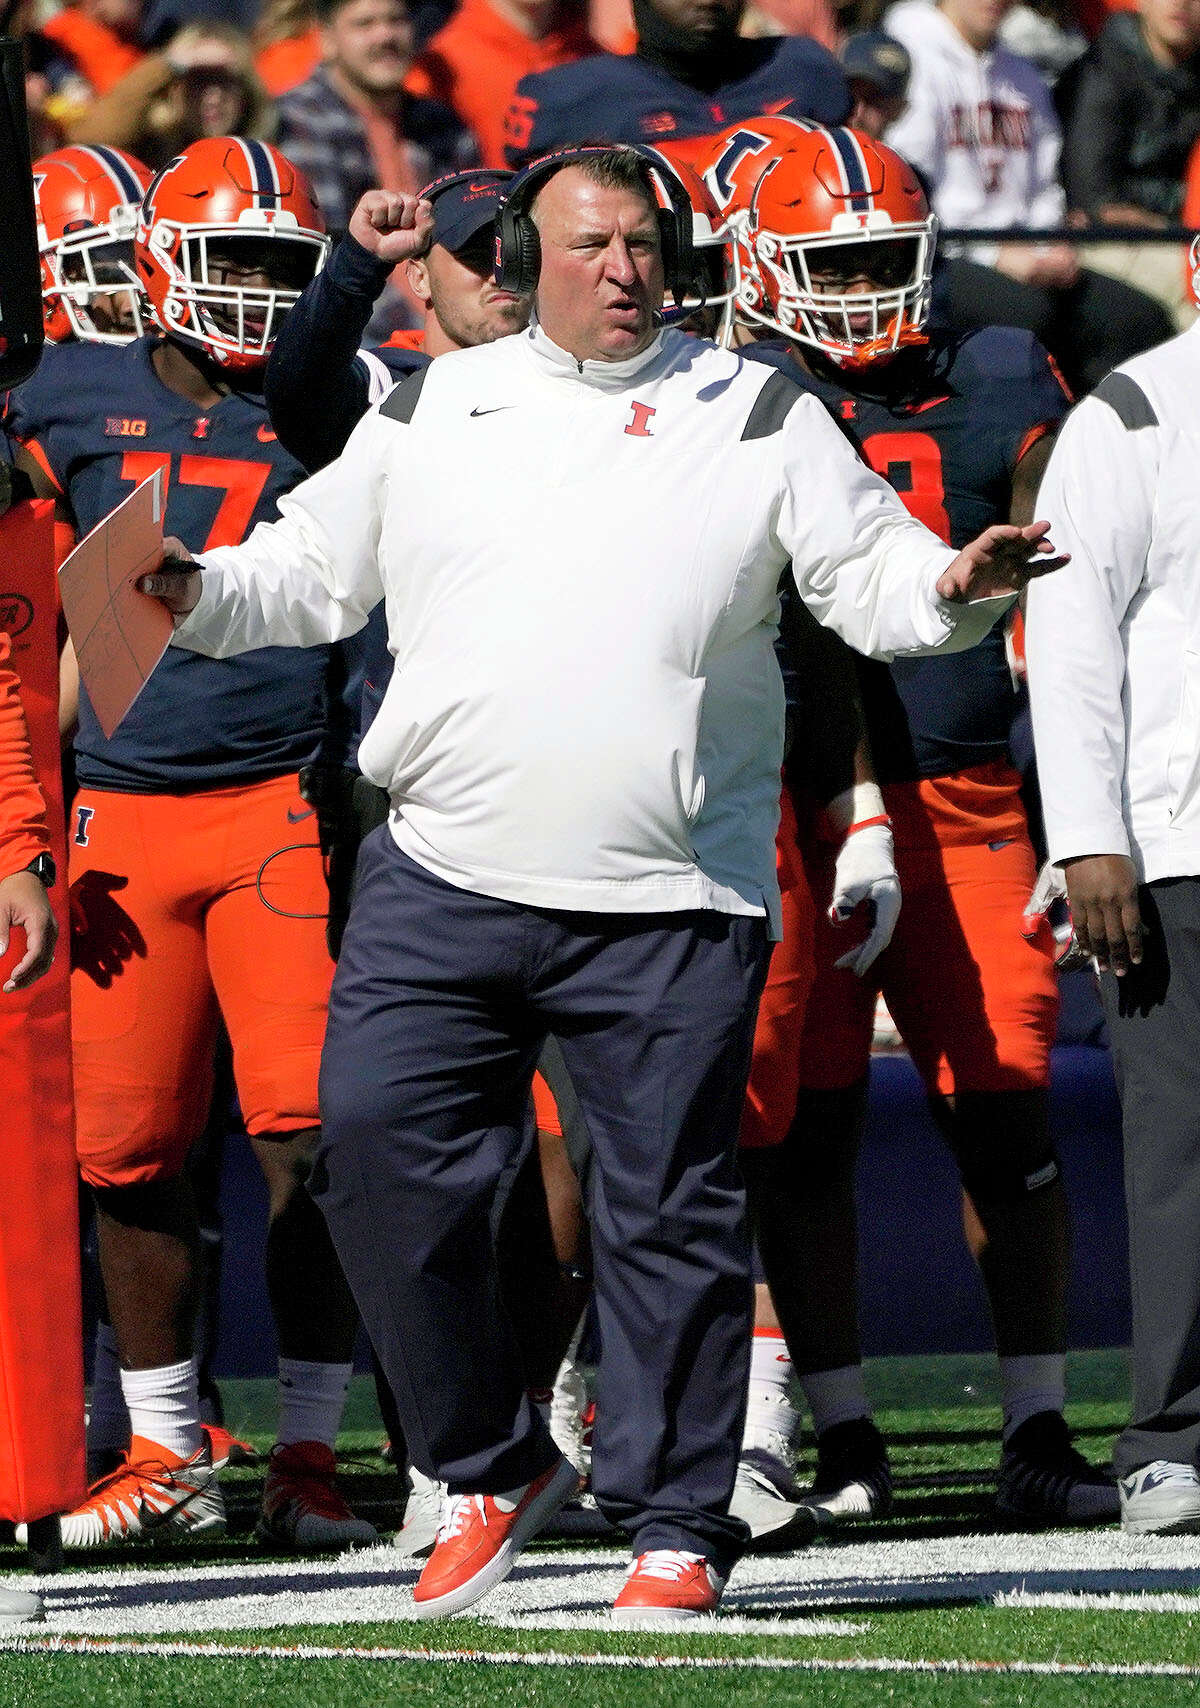 Illinois coach Bret Bielema's team will play at Michigan Saturday in Big Ten action. Above, he gestures on the sideline during a win over Minnesota earlier this season at Memorial Stadium in Champaign.